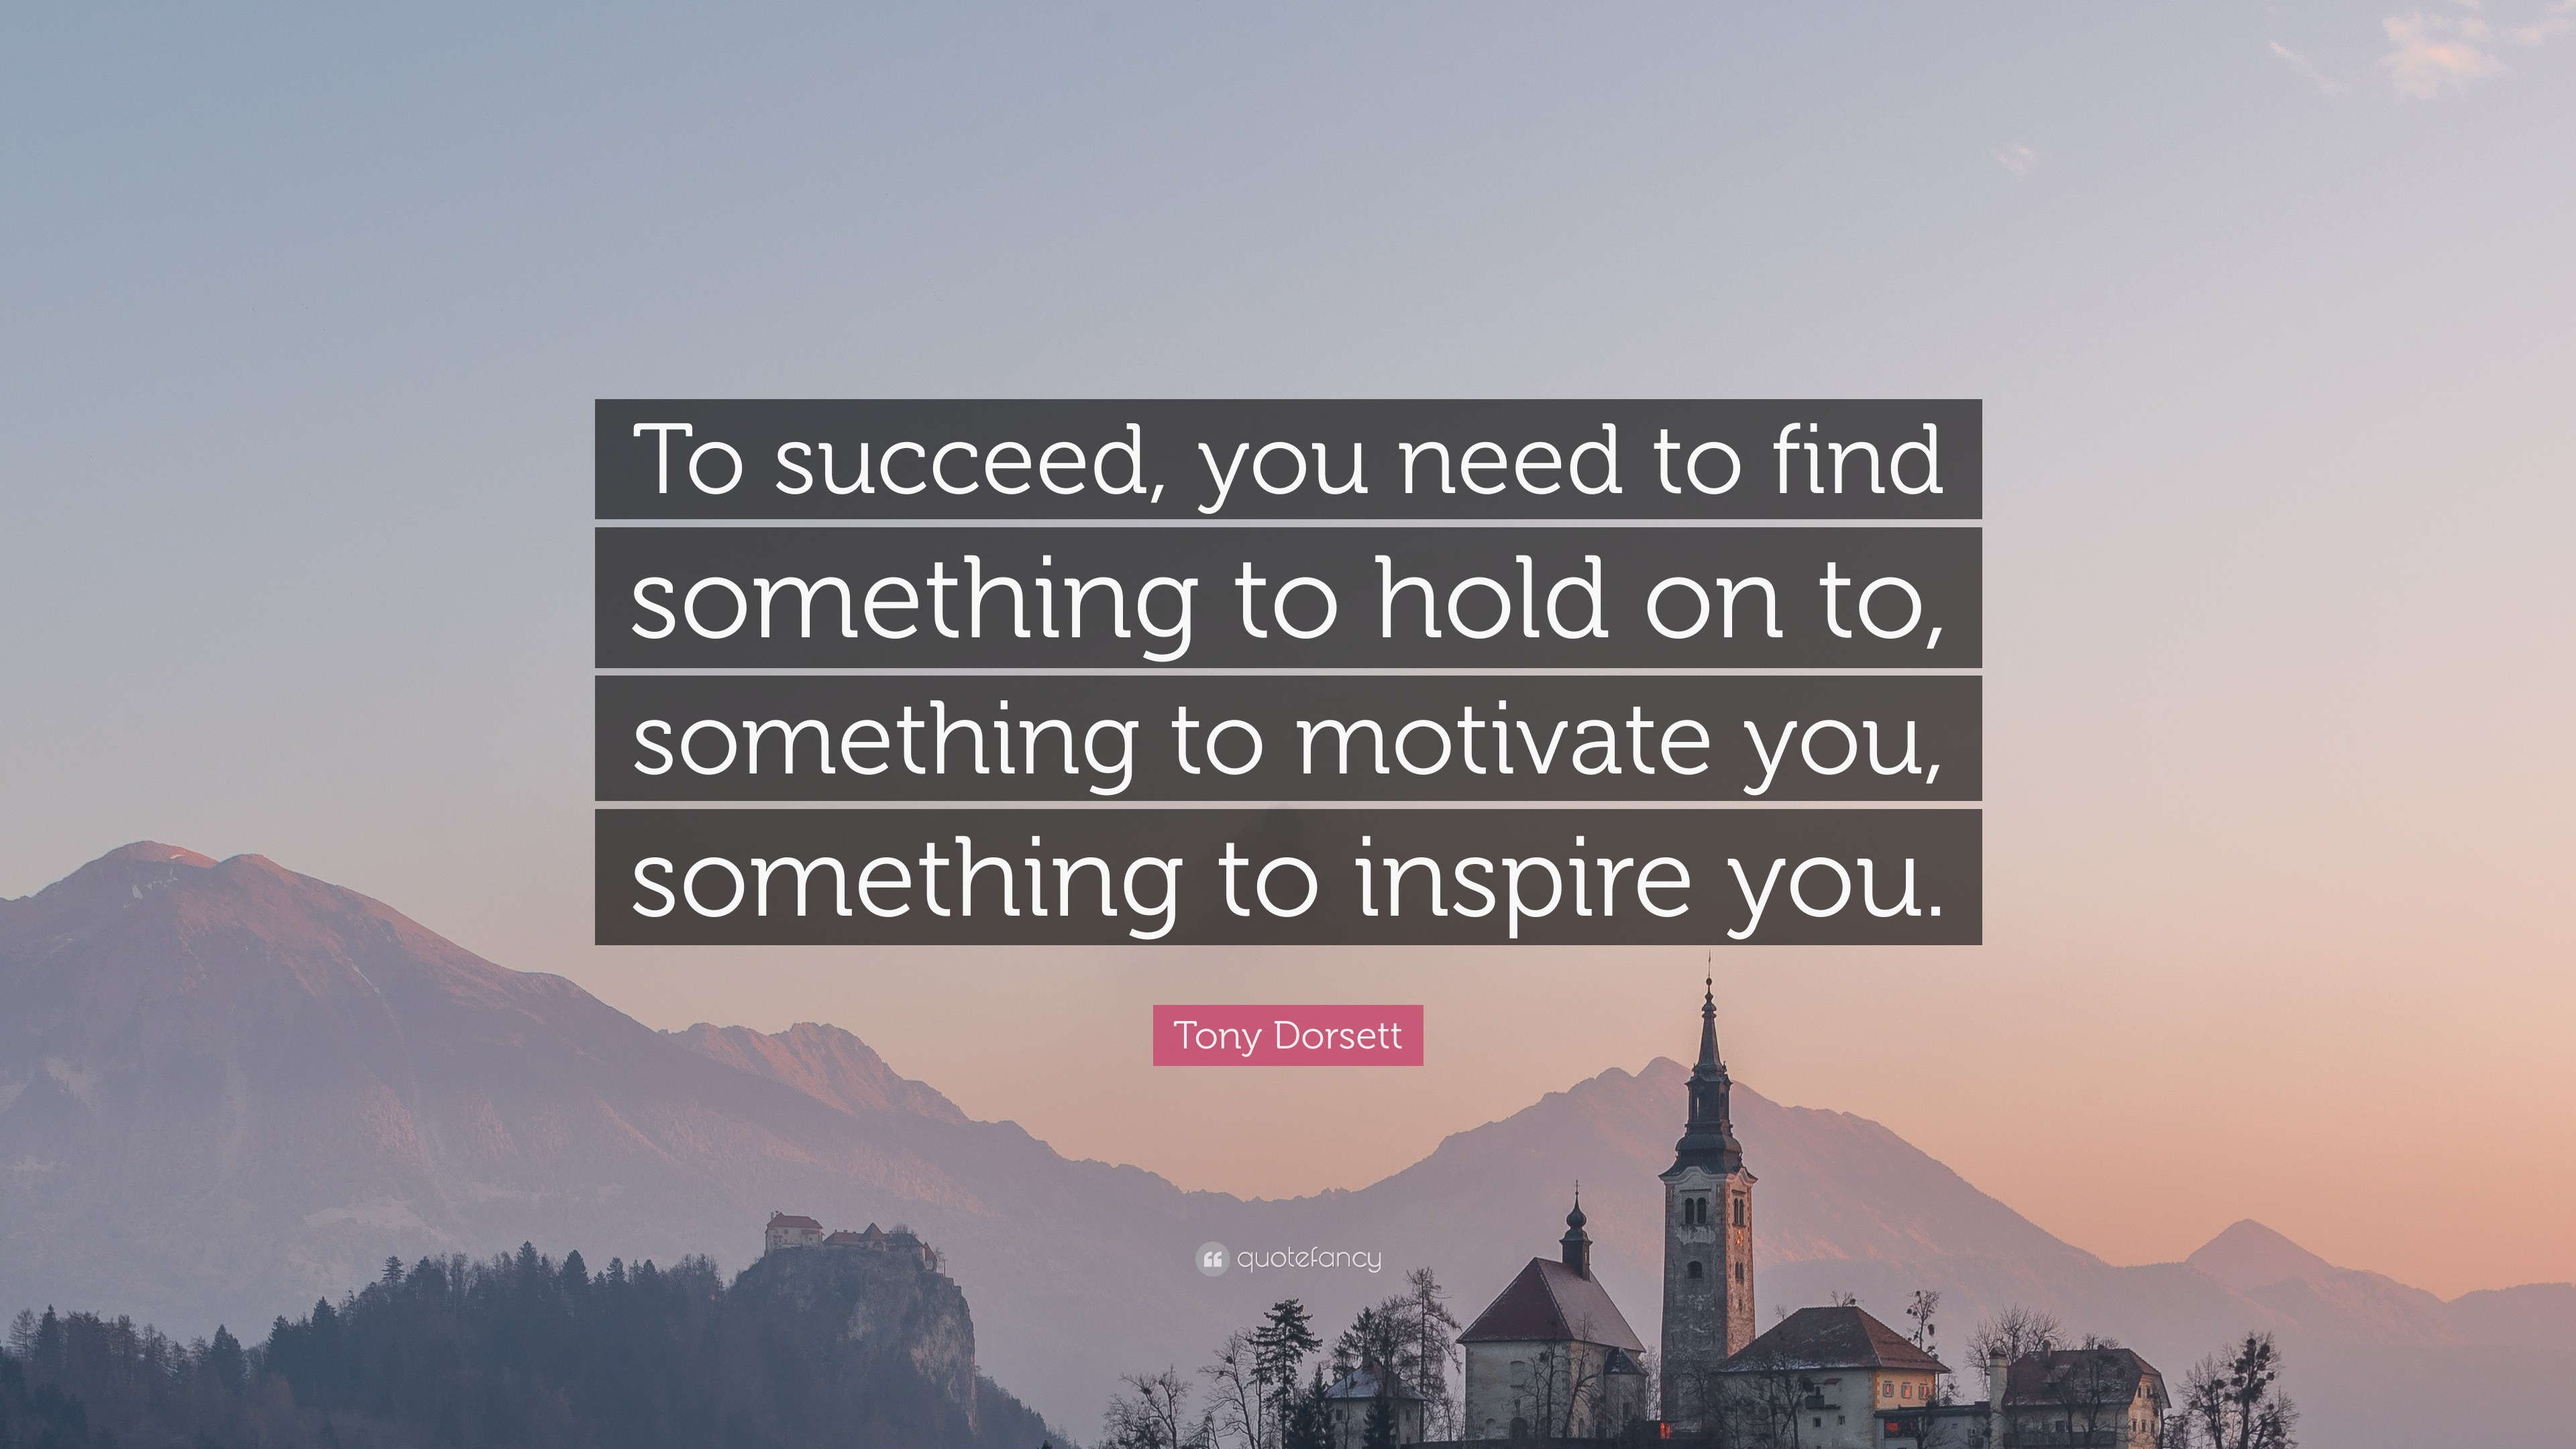 Tony Dorsett Quote: “To succeed, you need to find something to hold on